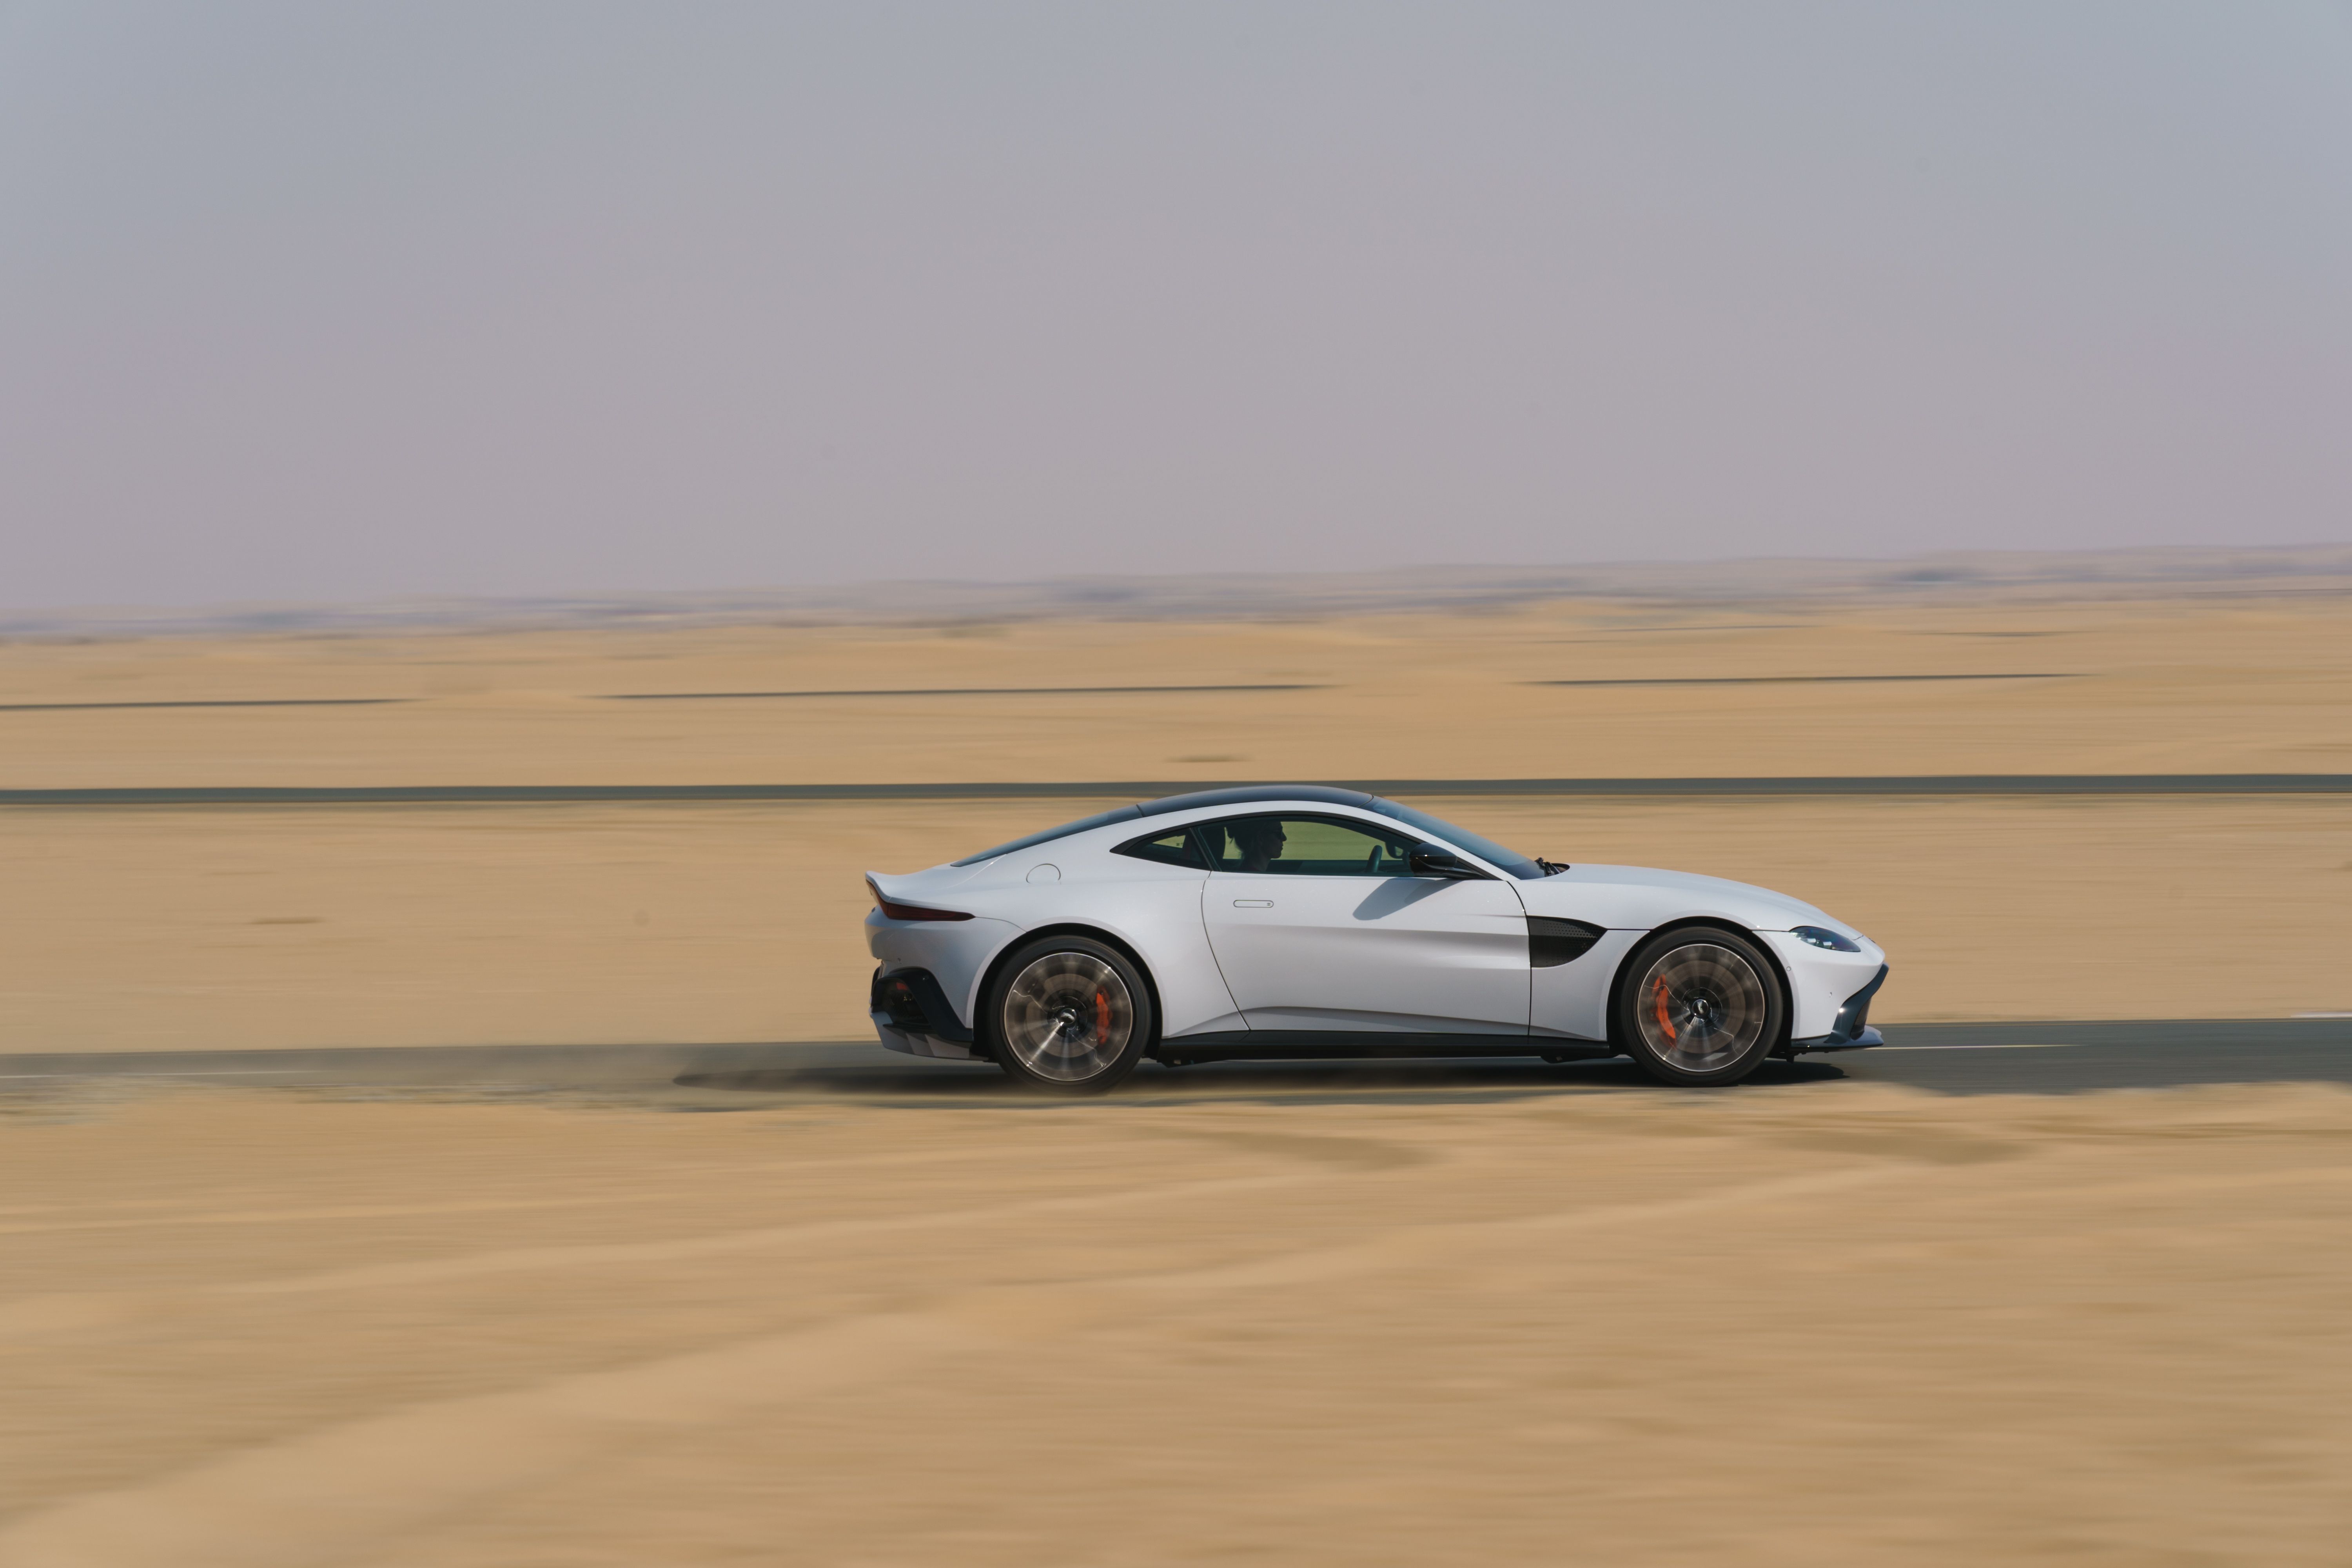 The side of the Aston Martin Vantage Coupe in white